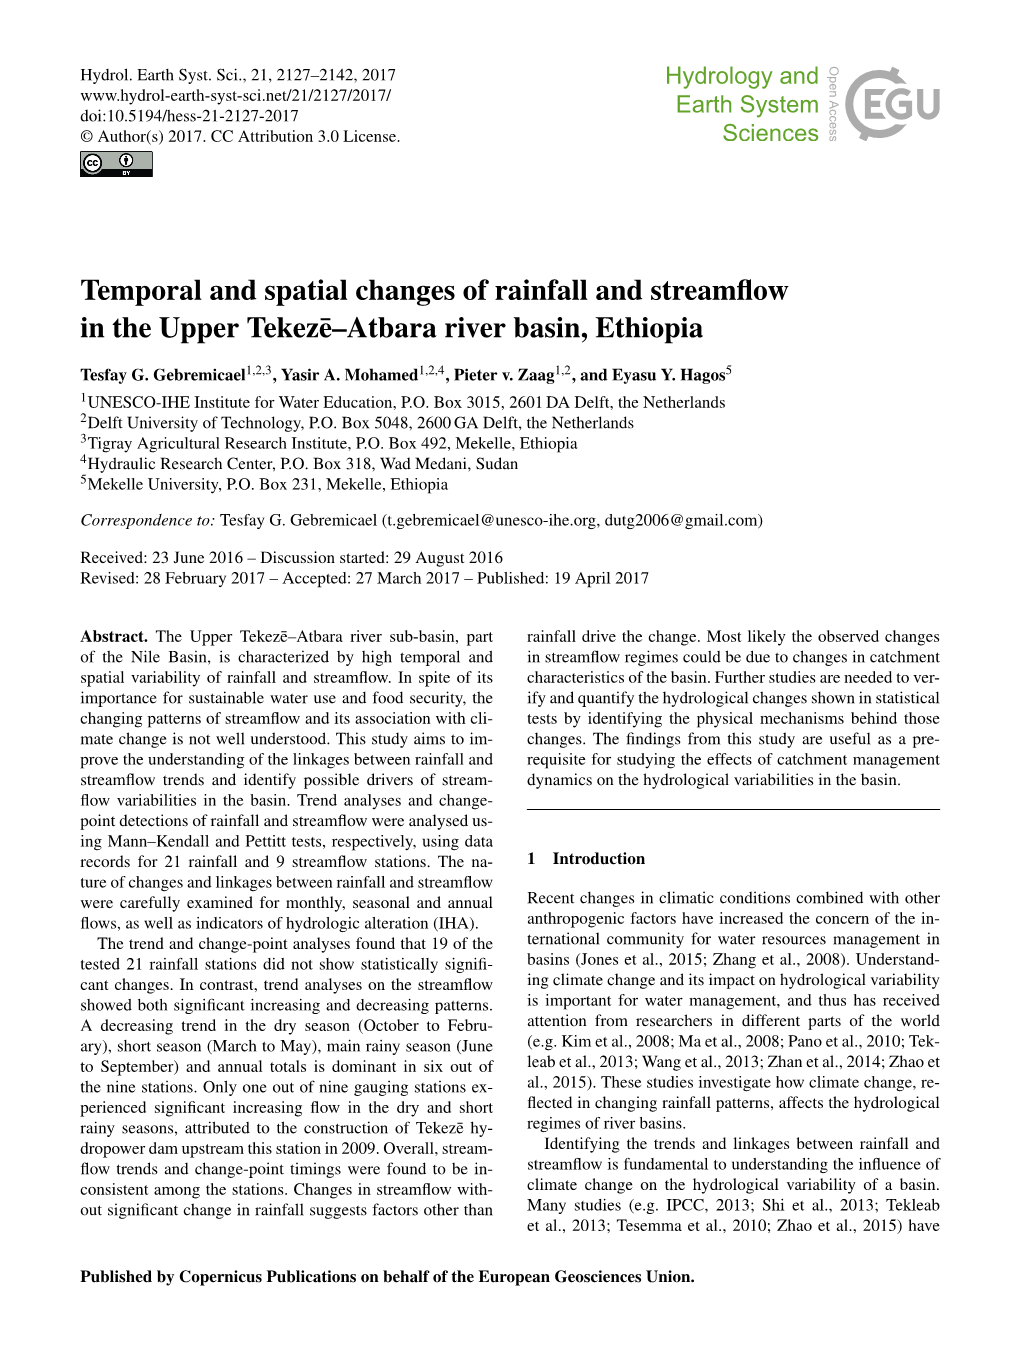 Temporal and Spatial Changes of Rainfall and Streamflow in the Upper Tekez¯E–Atbara River Basin, Ethiopia